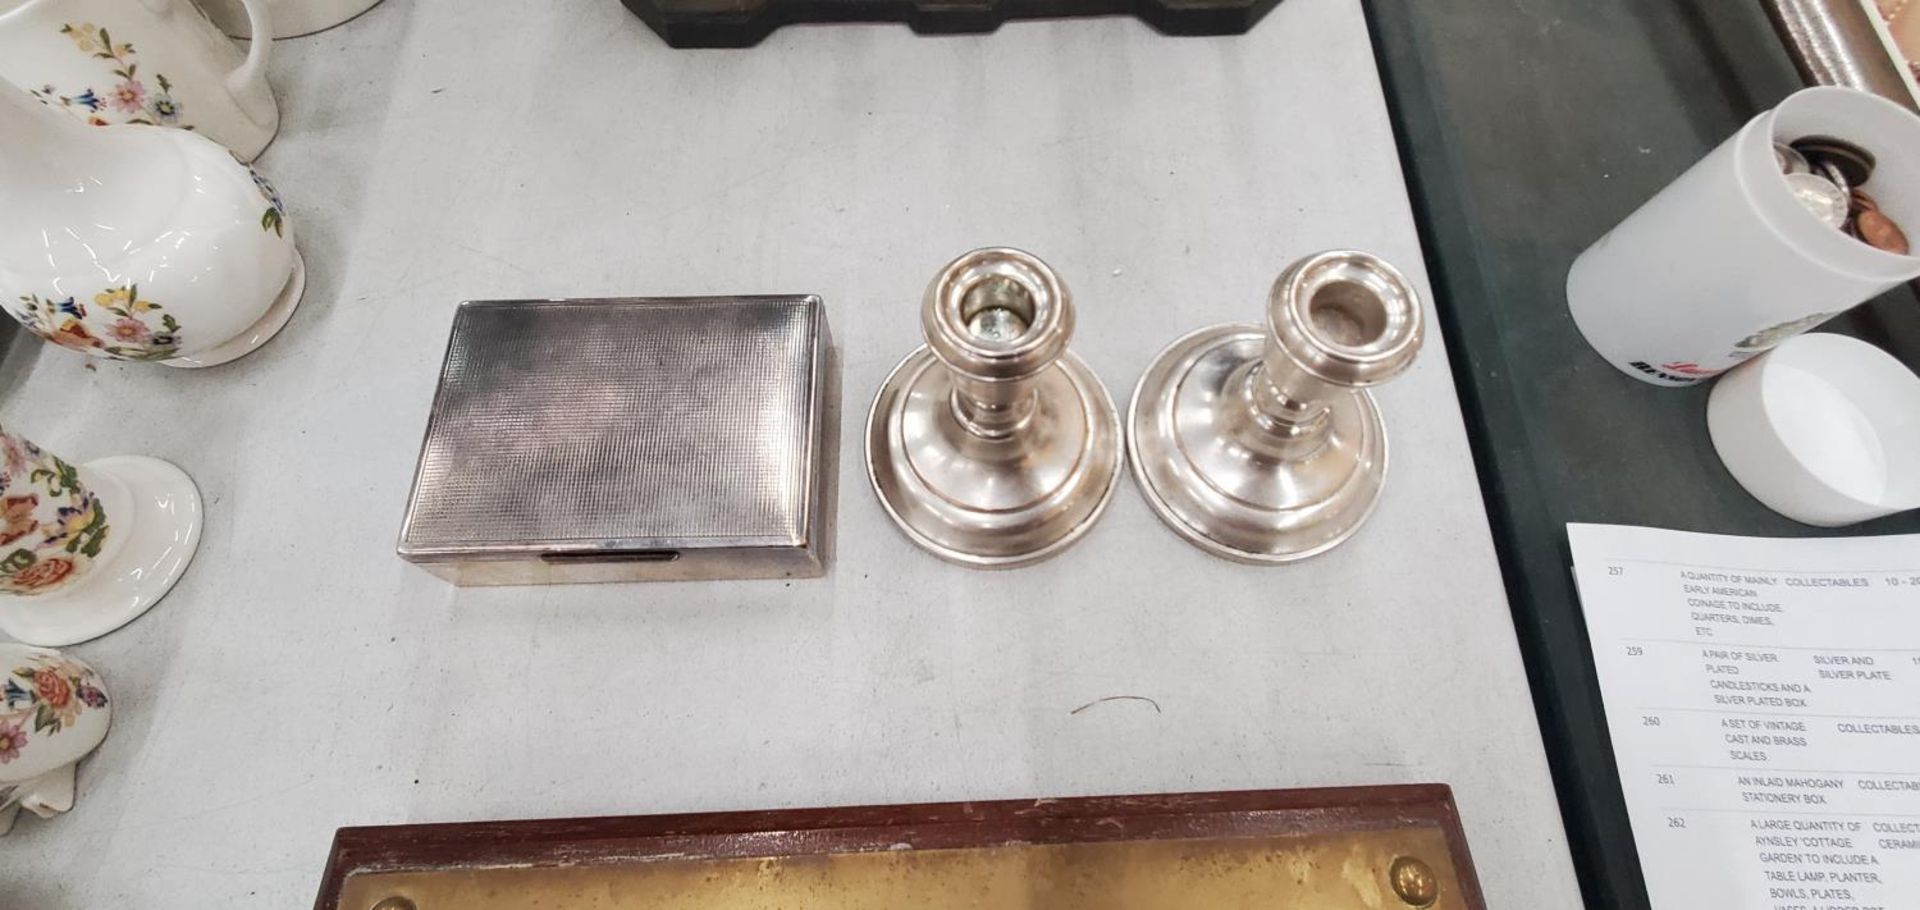 A PAIR OF SILVER PLATED CANDLESTICKS AND A SILVER PLATED BOX